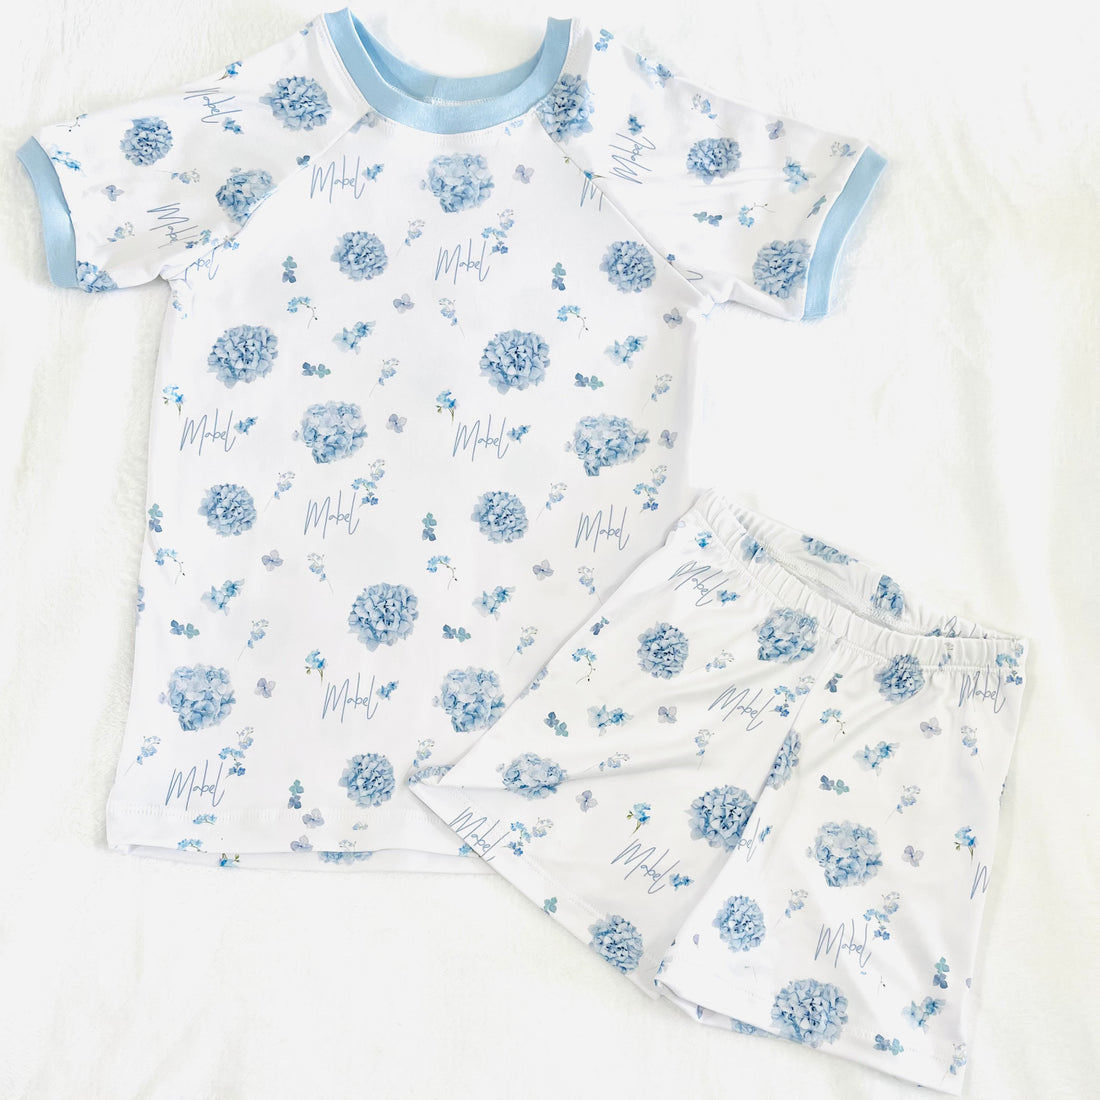 Mary’s Blue Floral Pajamas - Short or Long Sleeve (3 months to kids 14)